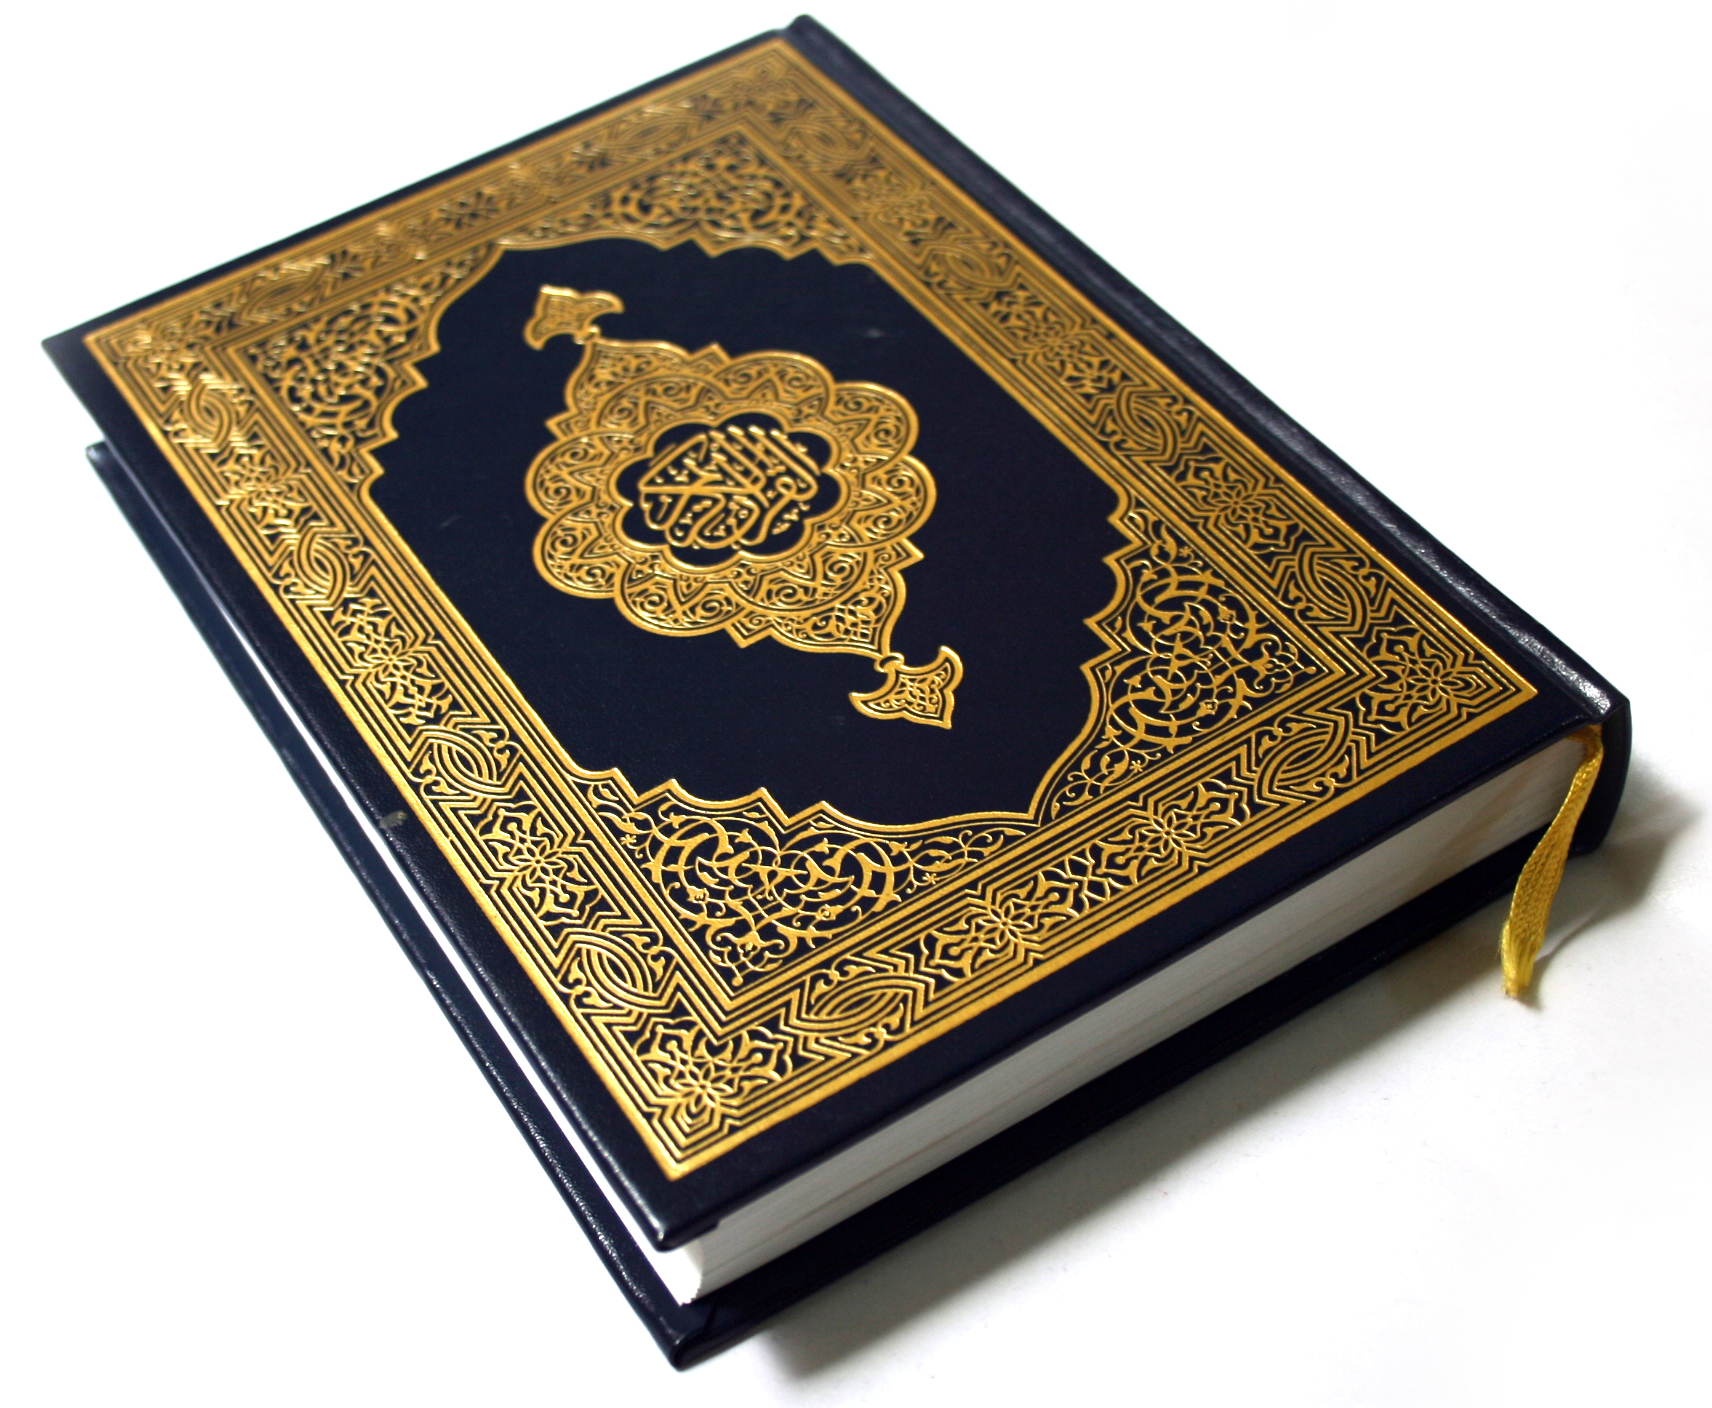 They Embraced Islam: How and Why? (Special Folder)